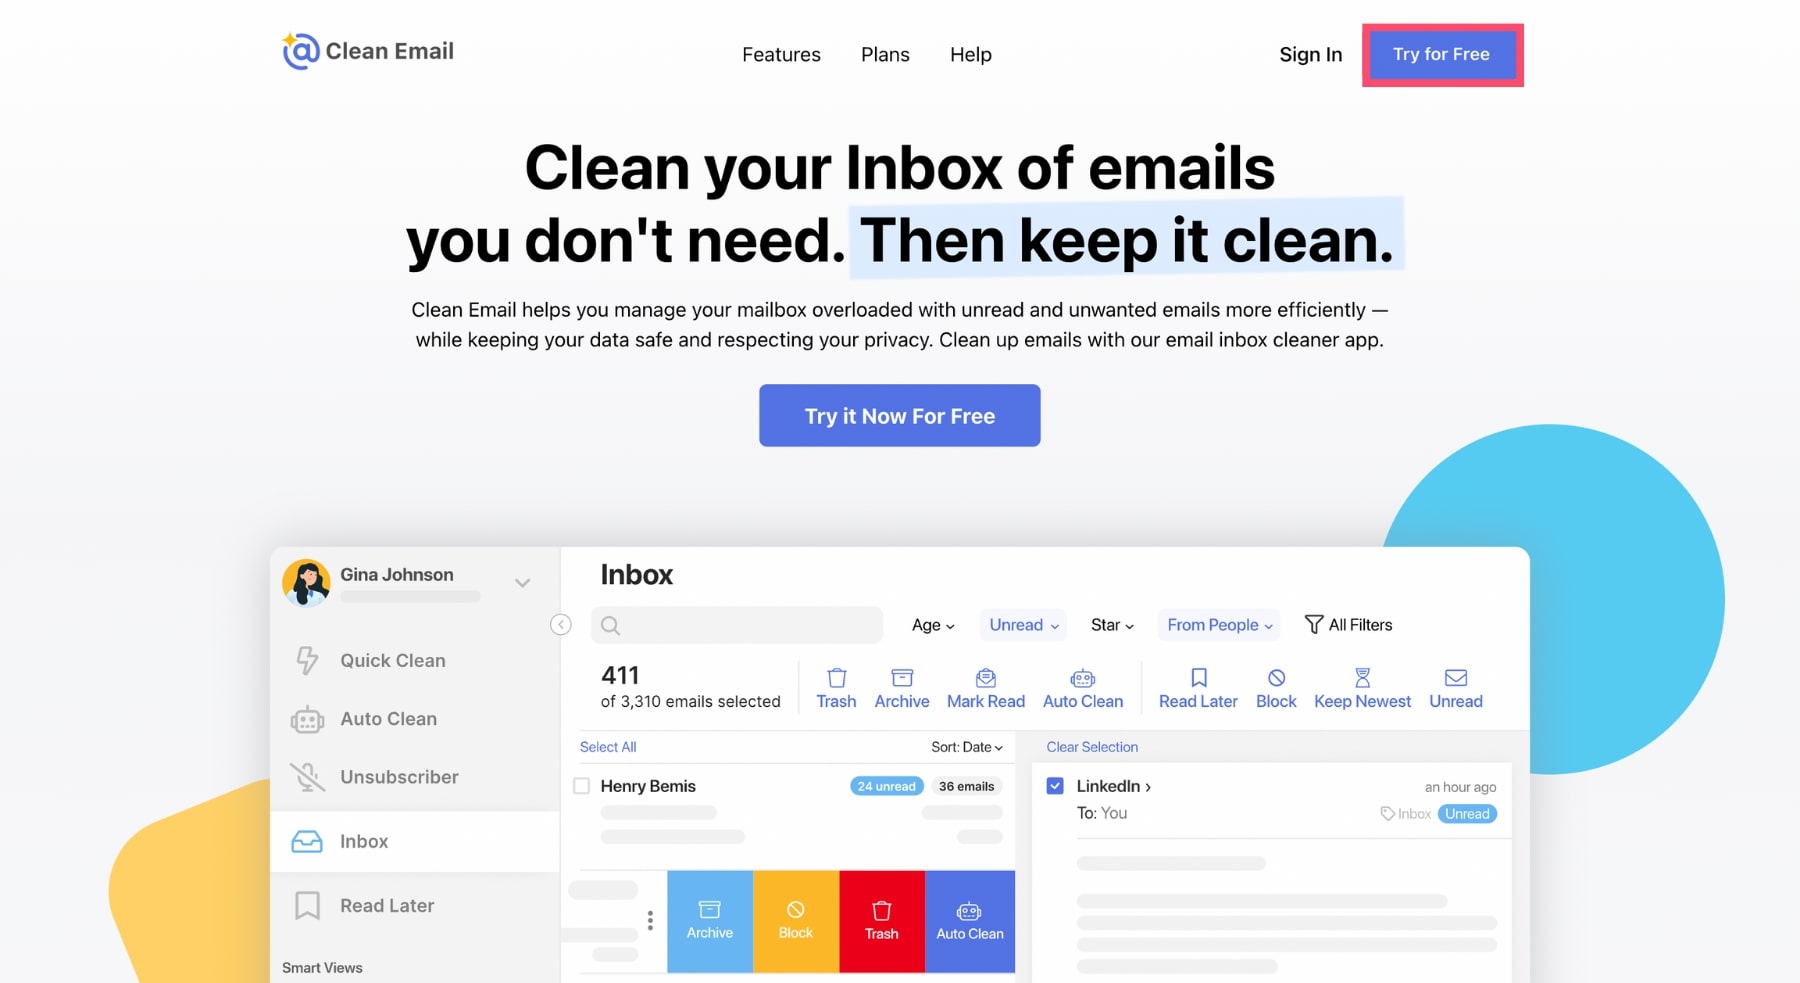 Clean Email free trial